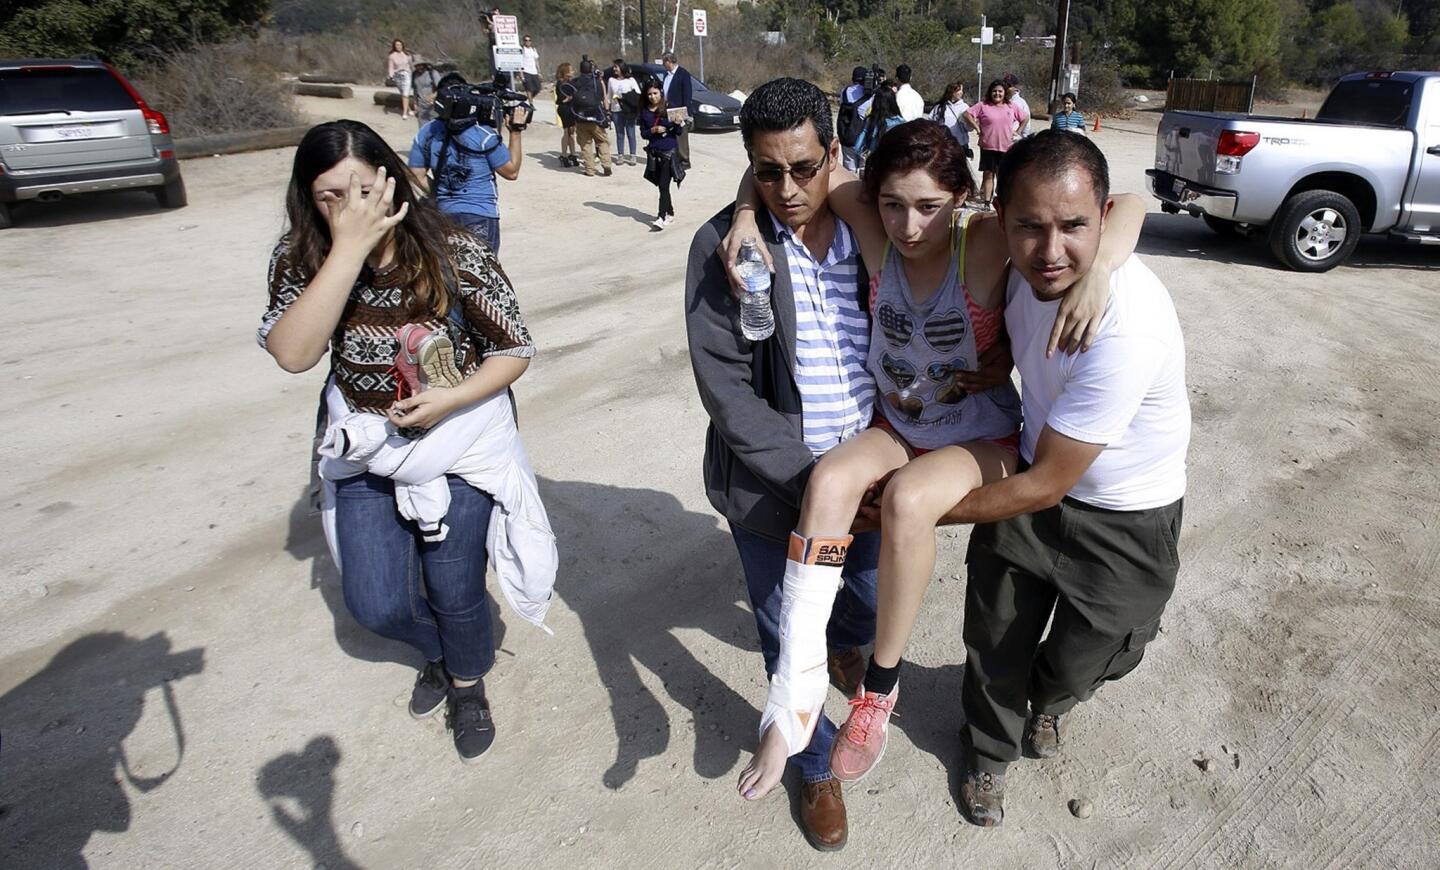 Claudia Ortiz, 20, is carried by her stepfather, Raphael Palacios, left, and friend Christian Armenta, right, after being rescued near Eaton Canyon in Altadena. Ortiz suffered an ankle injury during the operation.